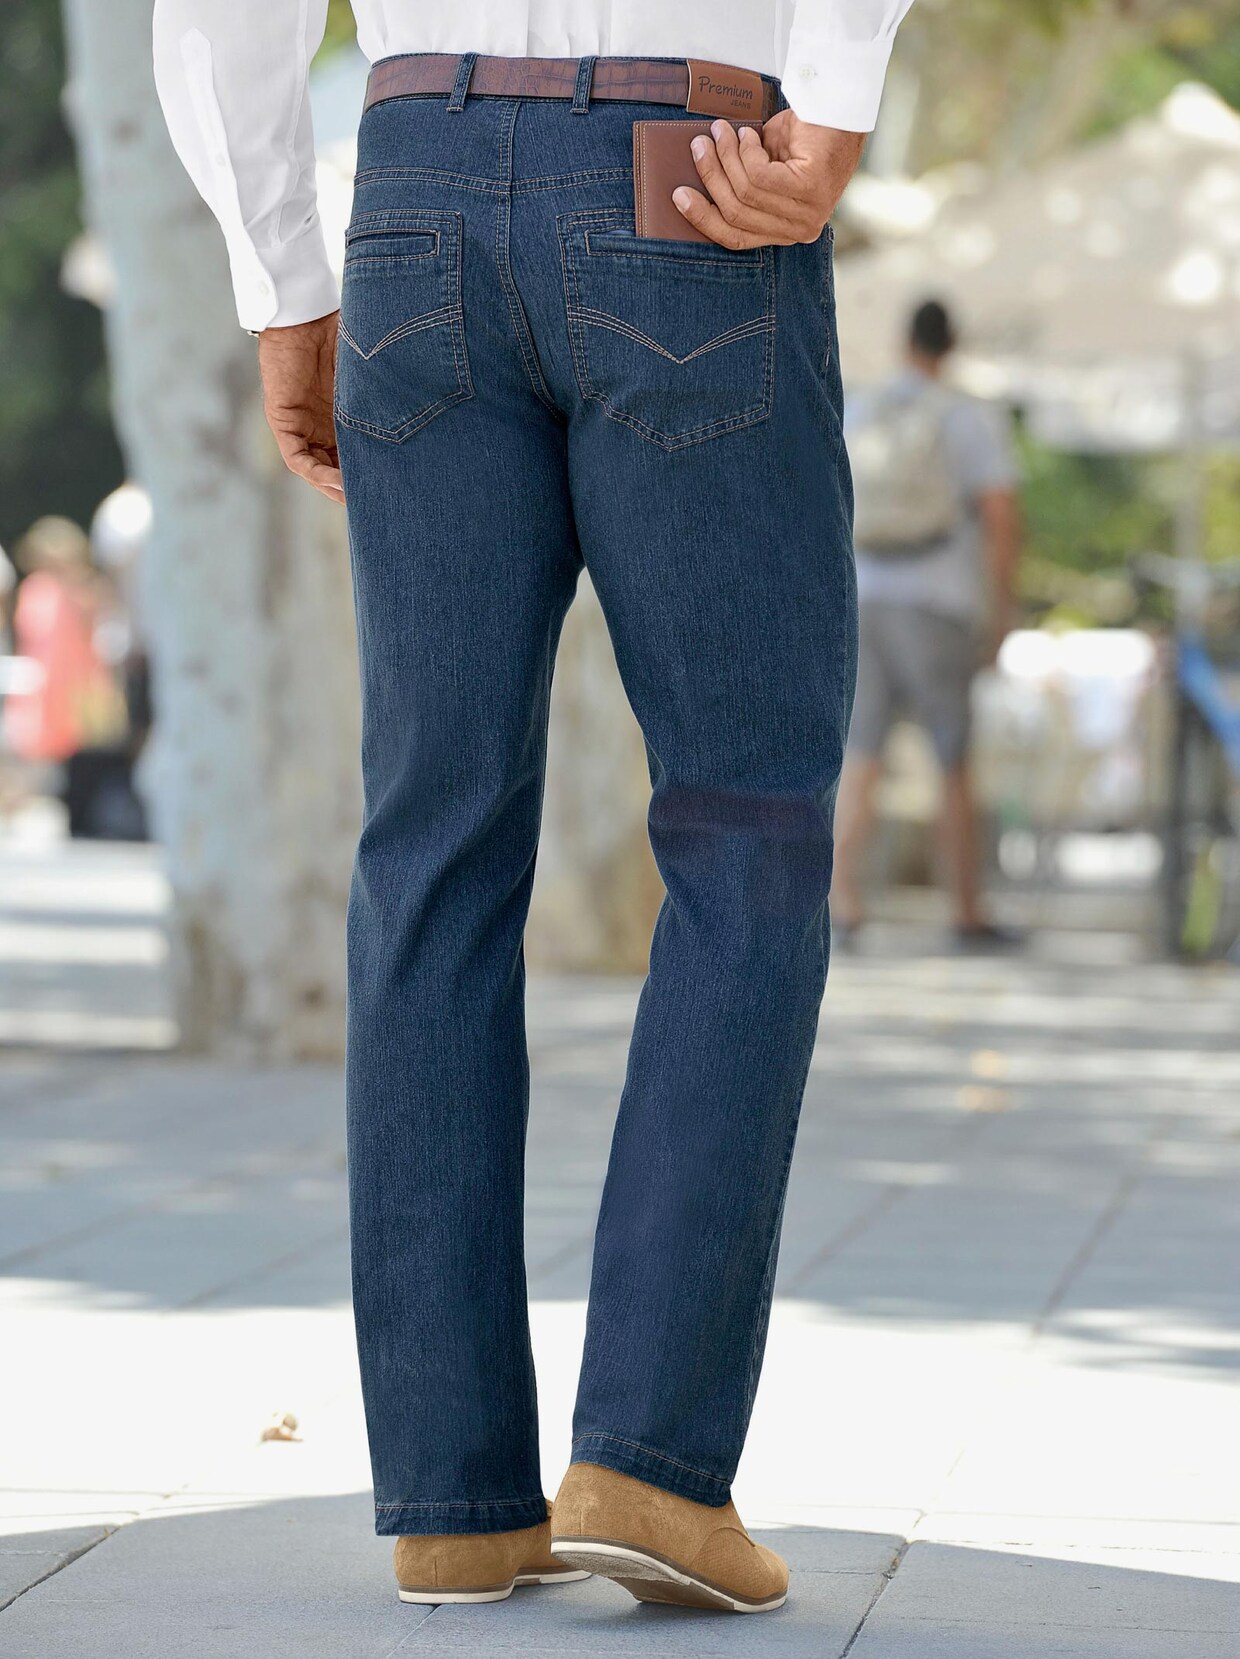 Marco Donati Jeans - blue-stone-washed